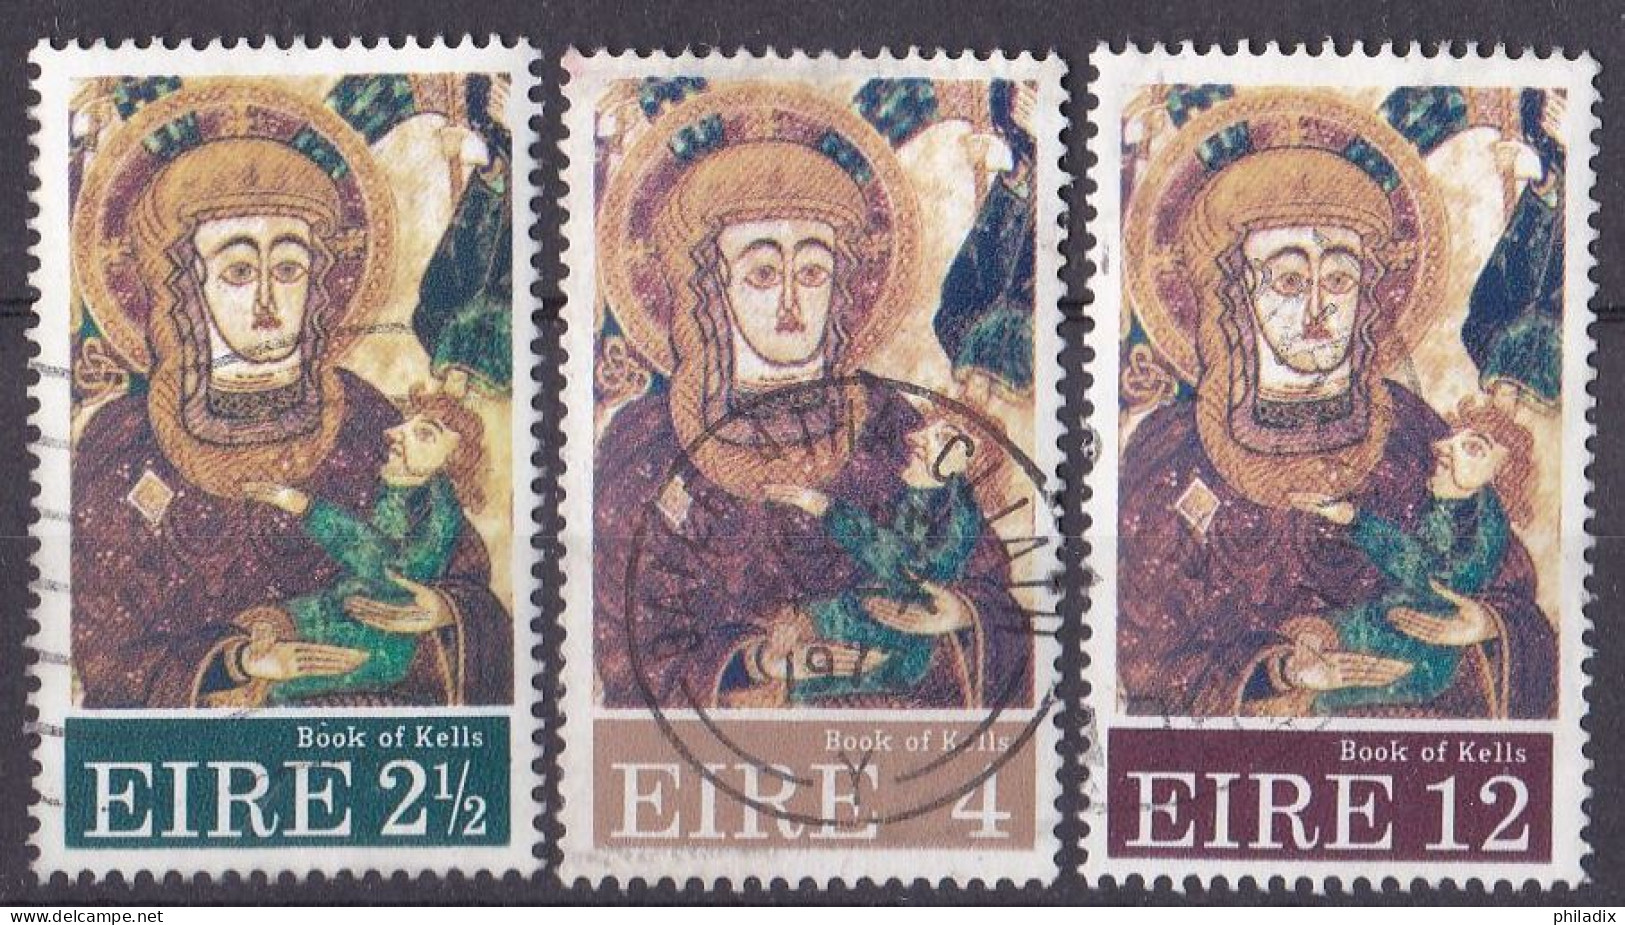 Irland Satz Von 1972 O/used (A5-10) - Used Stamps